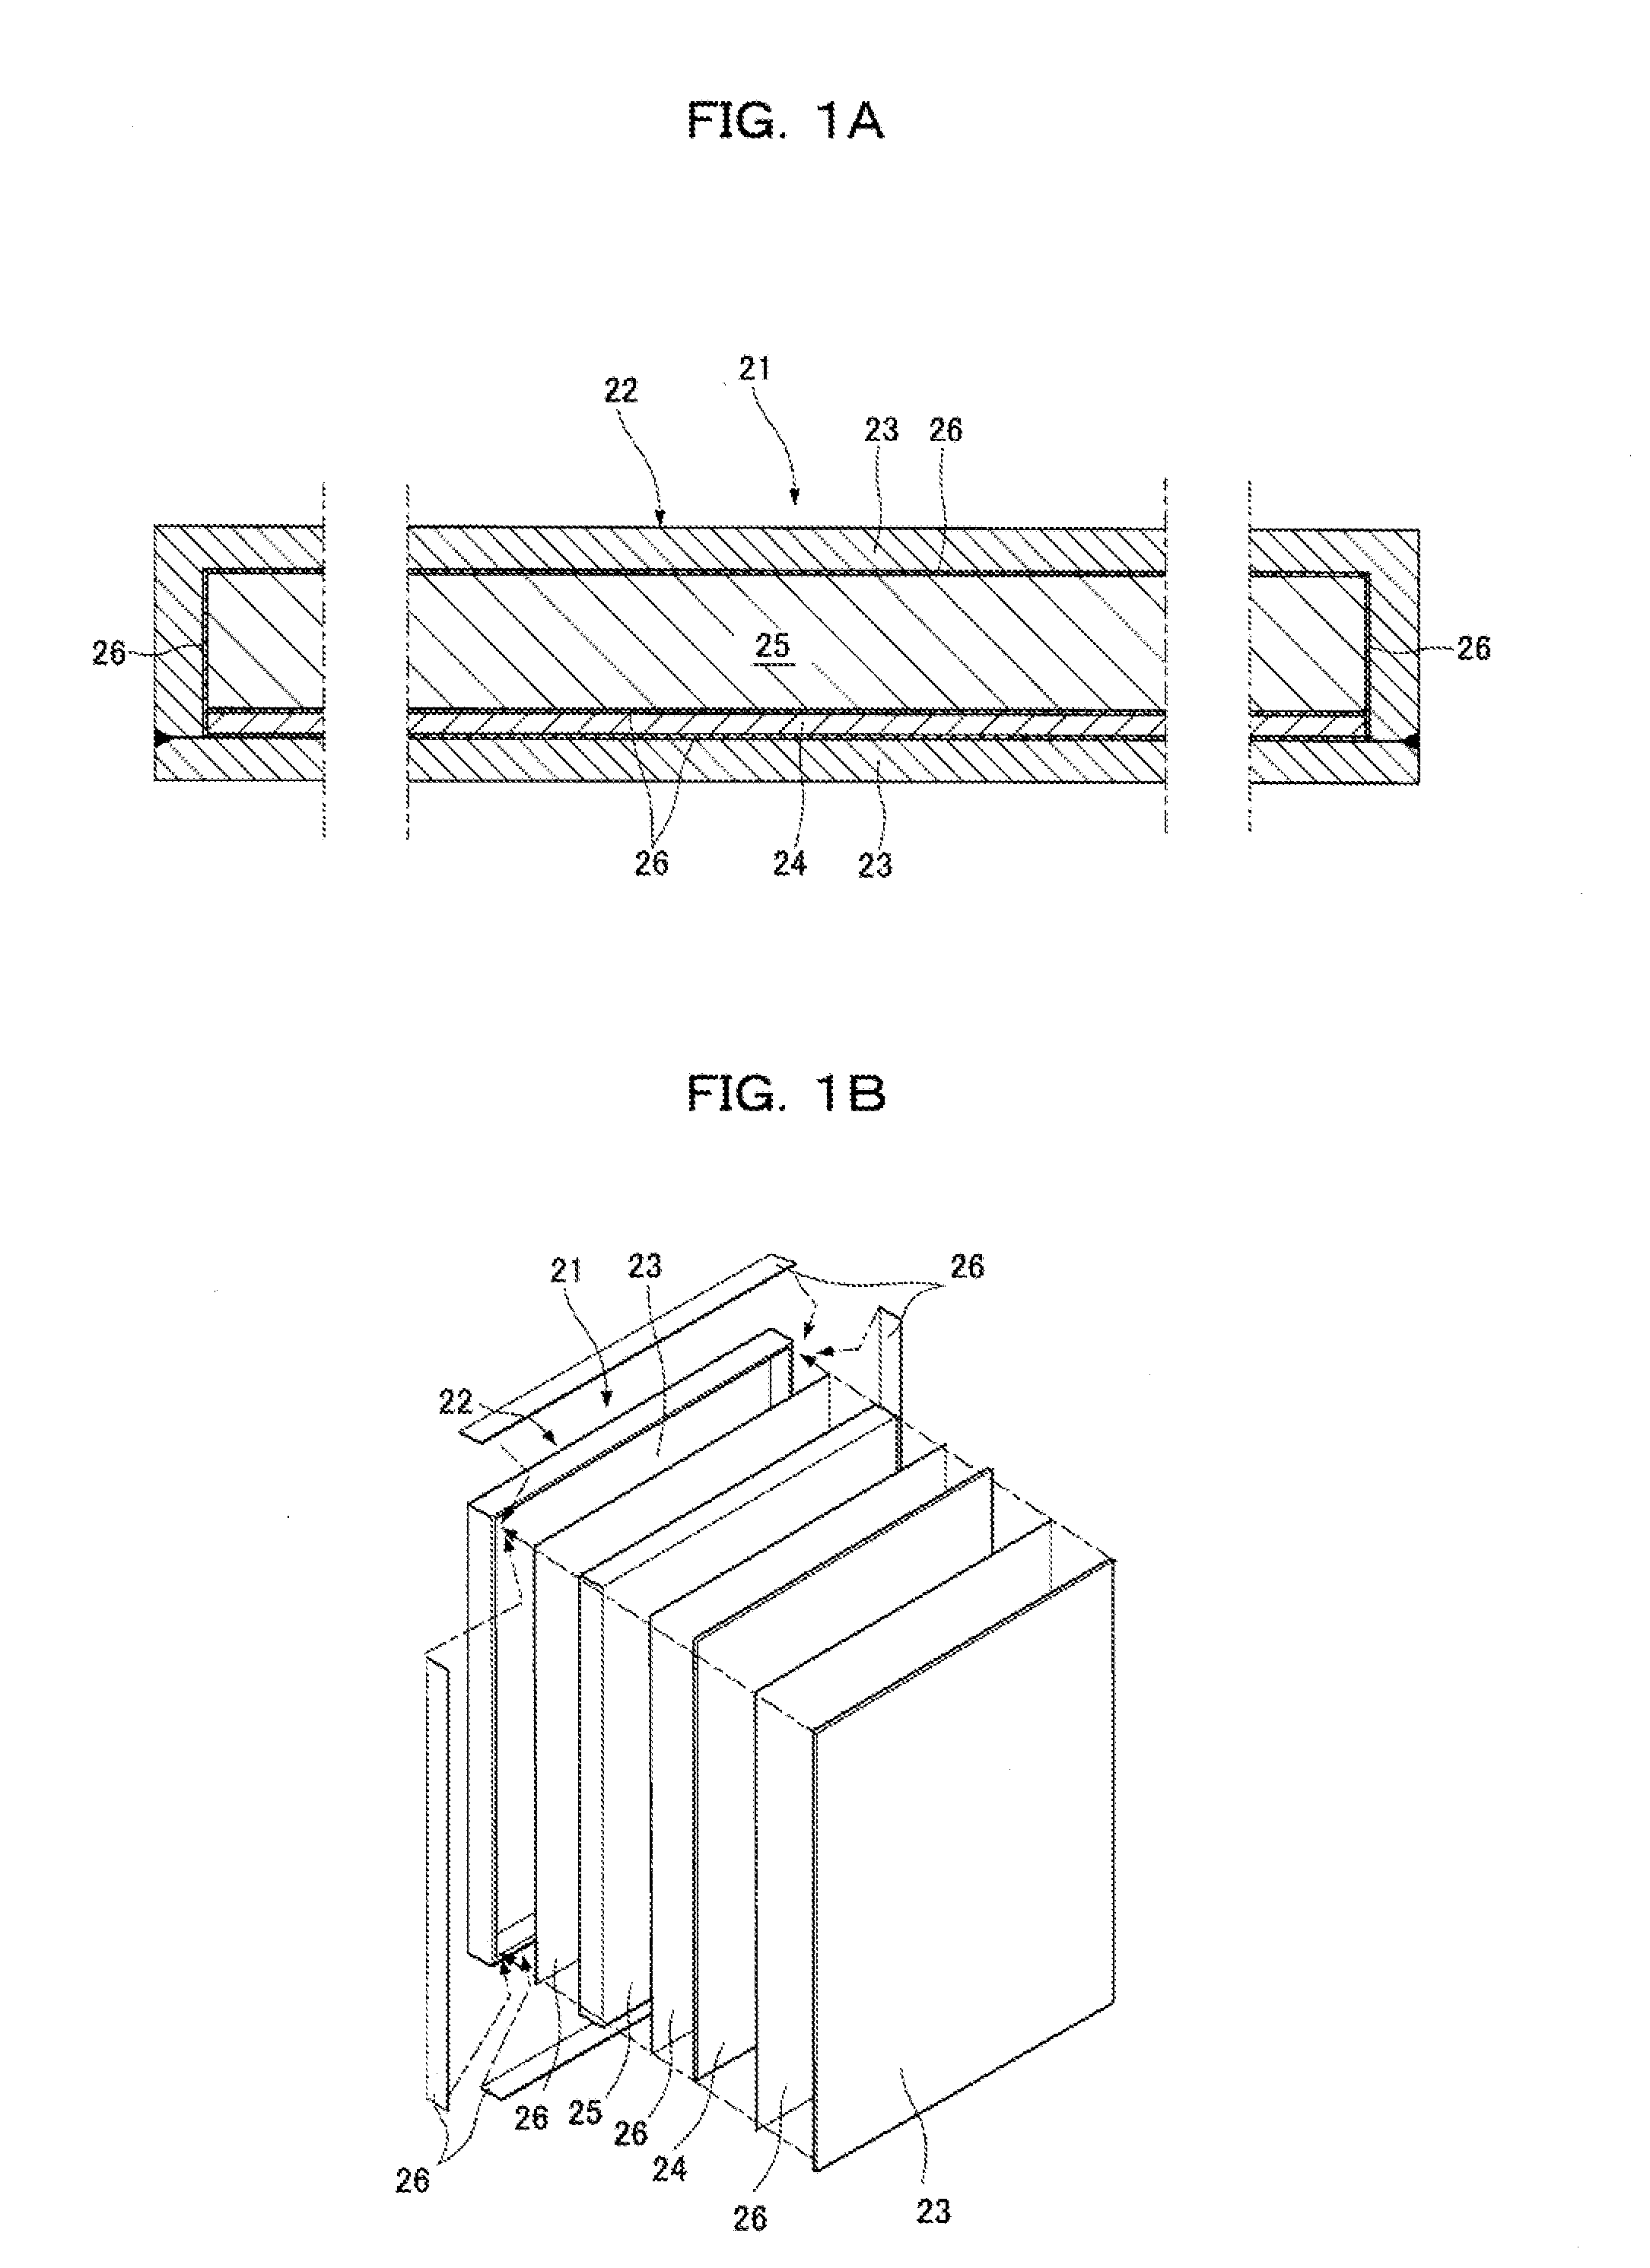 Shield and electron beam container sterilization equipment